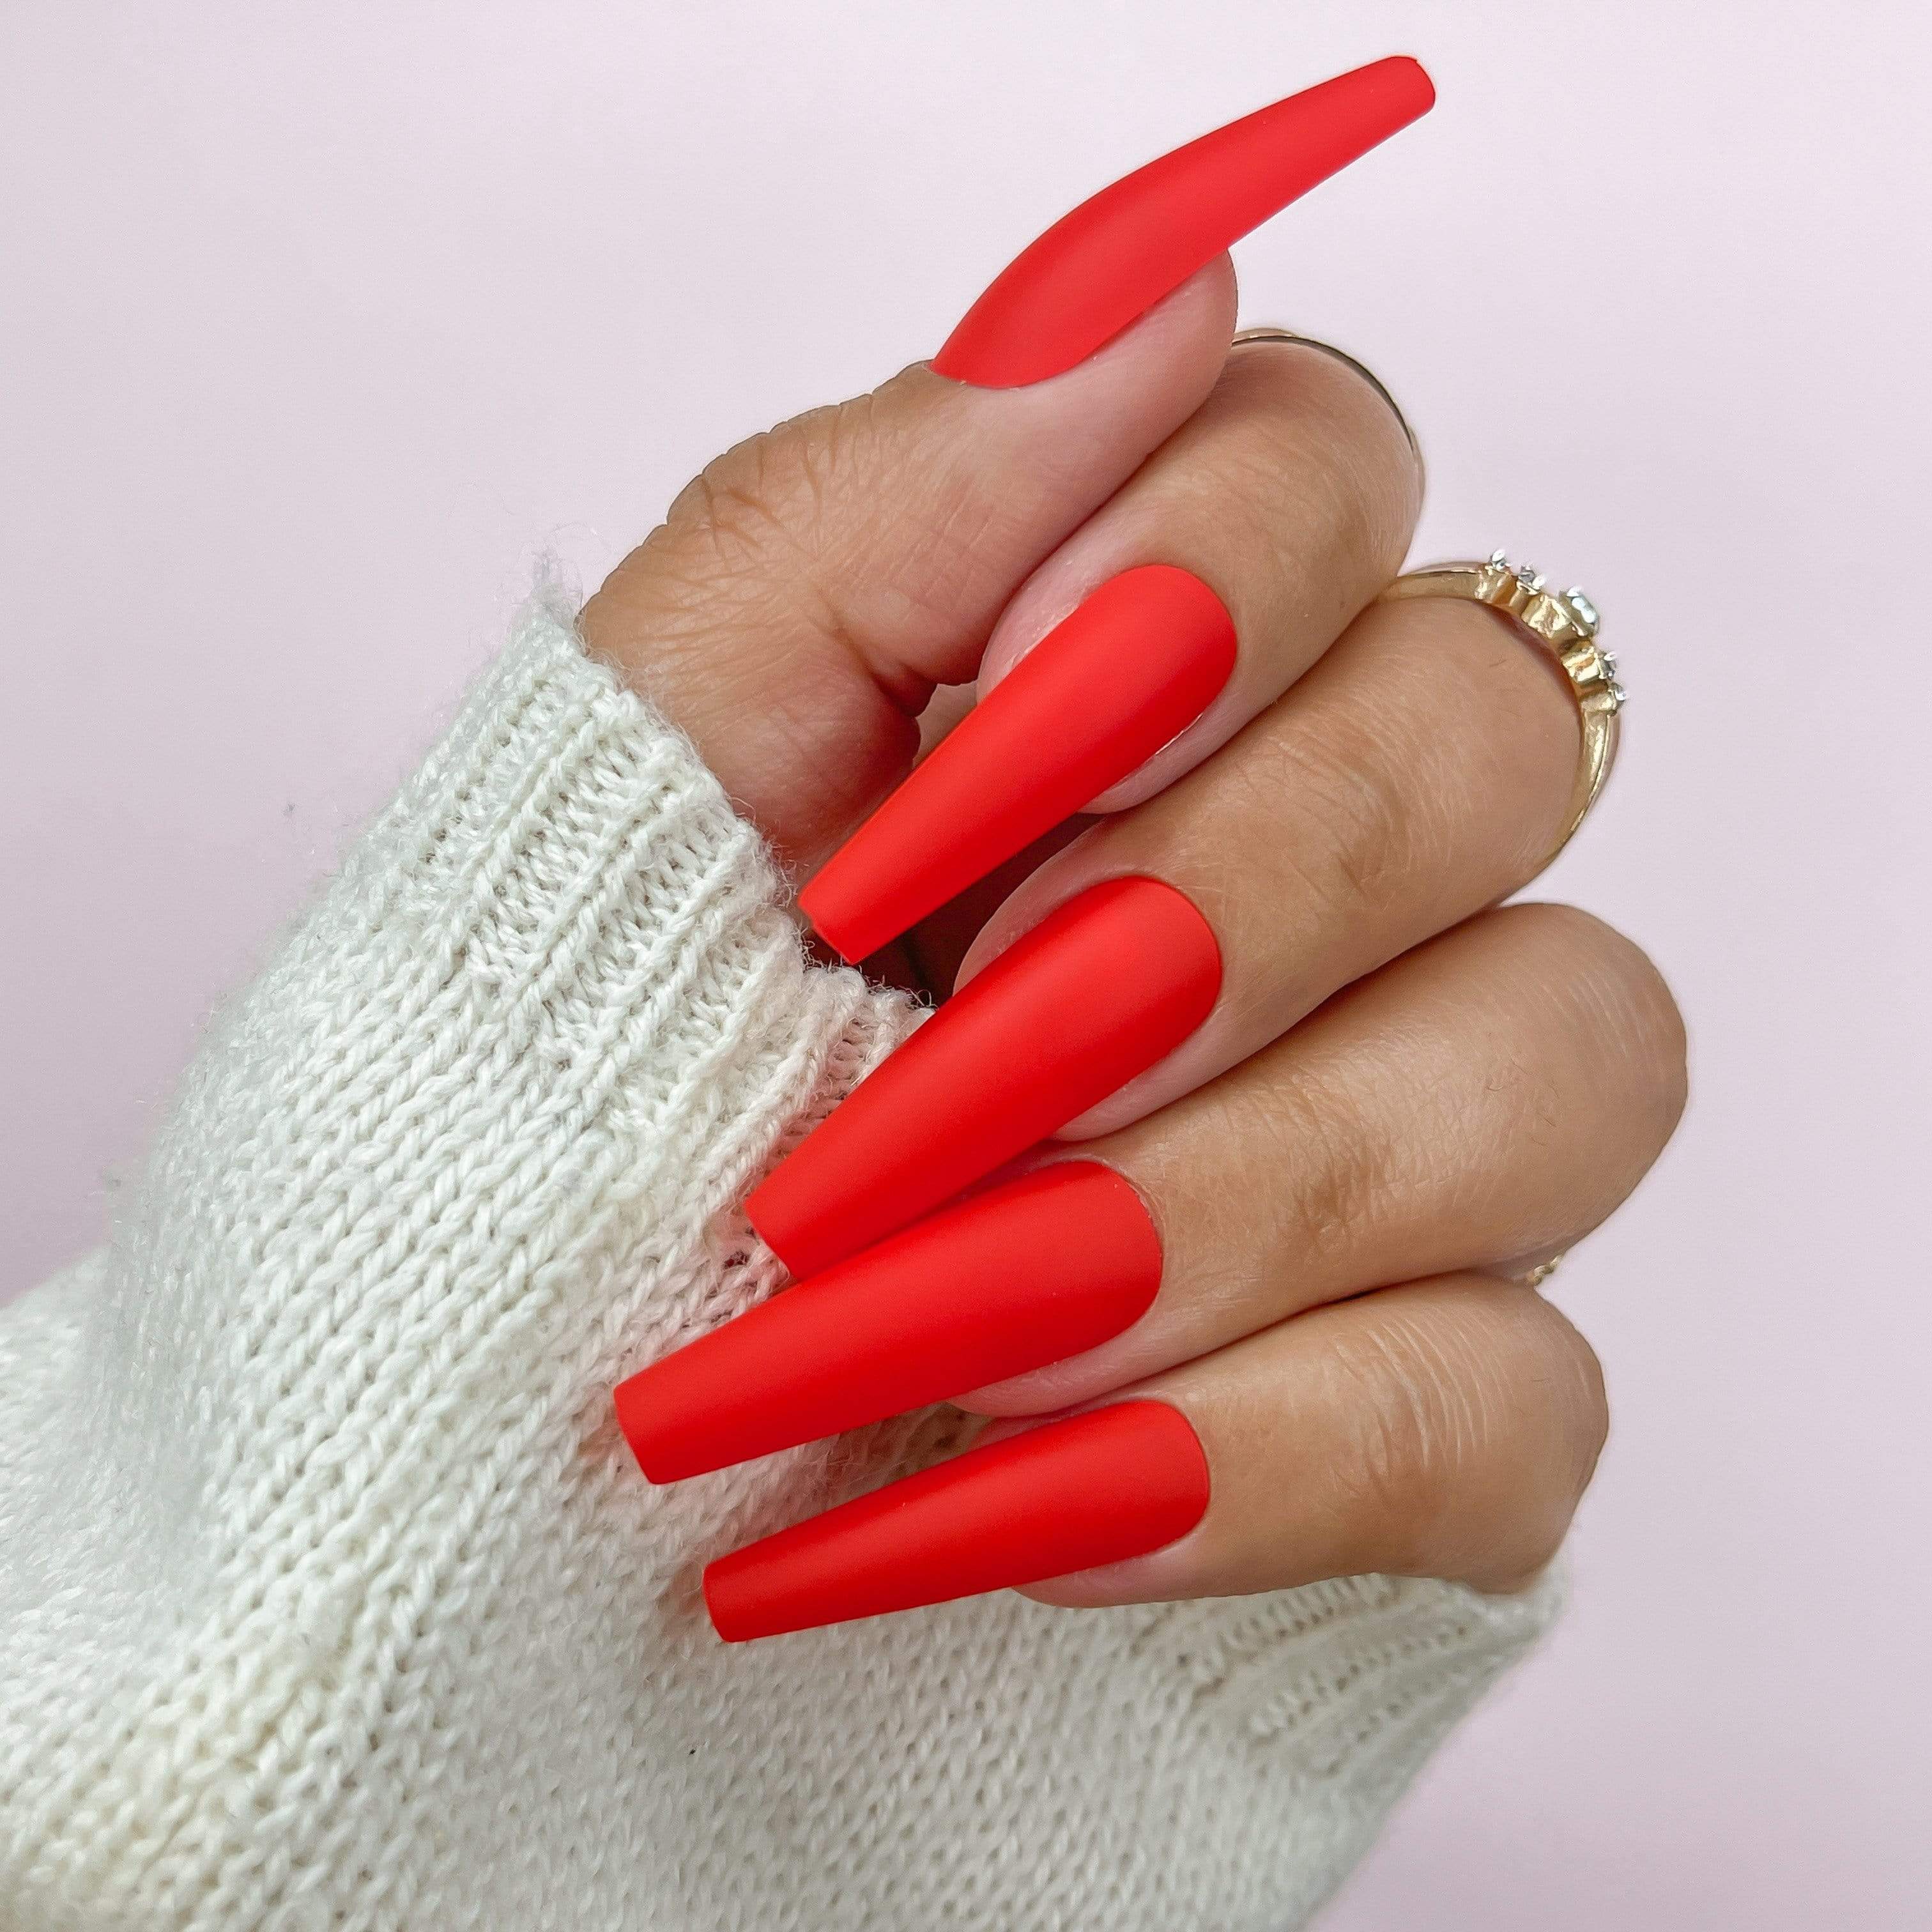 Matte Coral Red Square Long False Nails 1 With Adhesive Tape Slim Frosted  Design For Press On Fingernails From Bethanyary, $30.91 | DHgate.Com